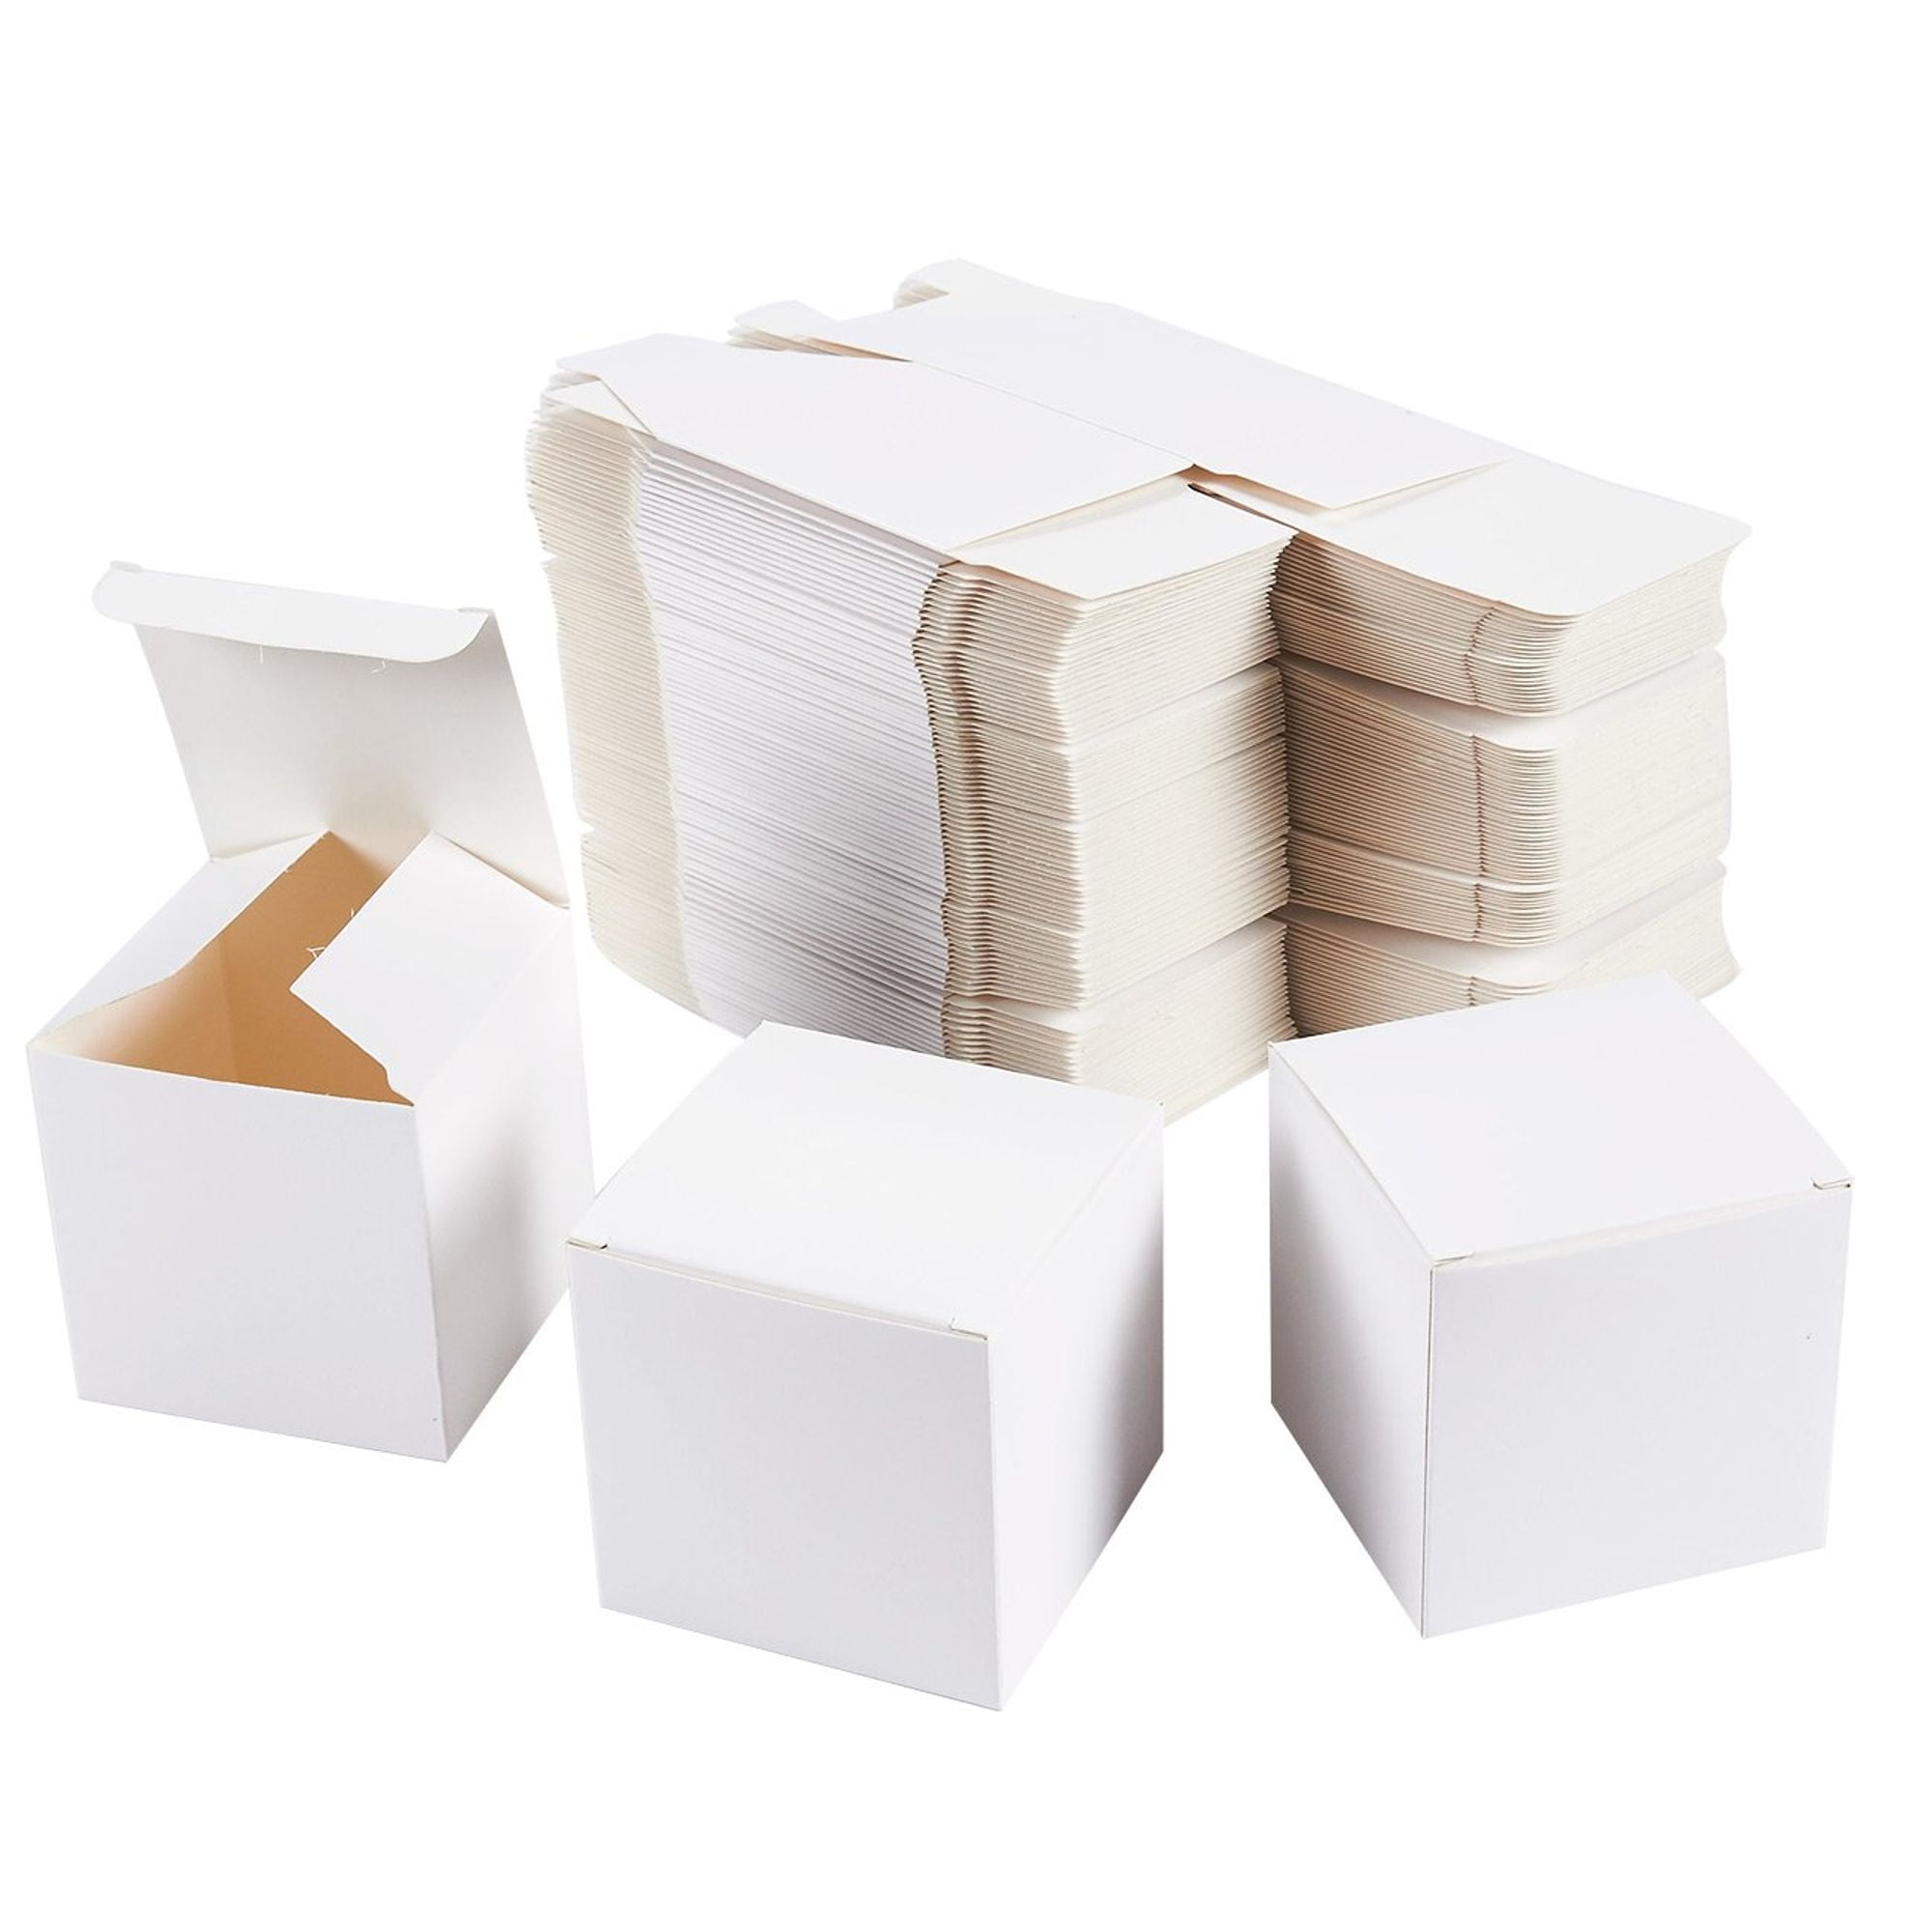 Design Layout White Boxes Empty Wrapping Paper Under Your Design Gift ...